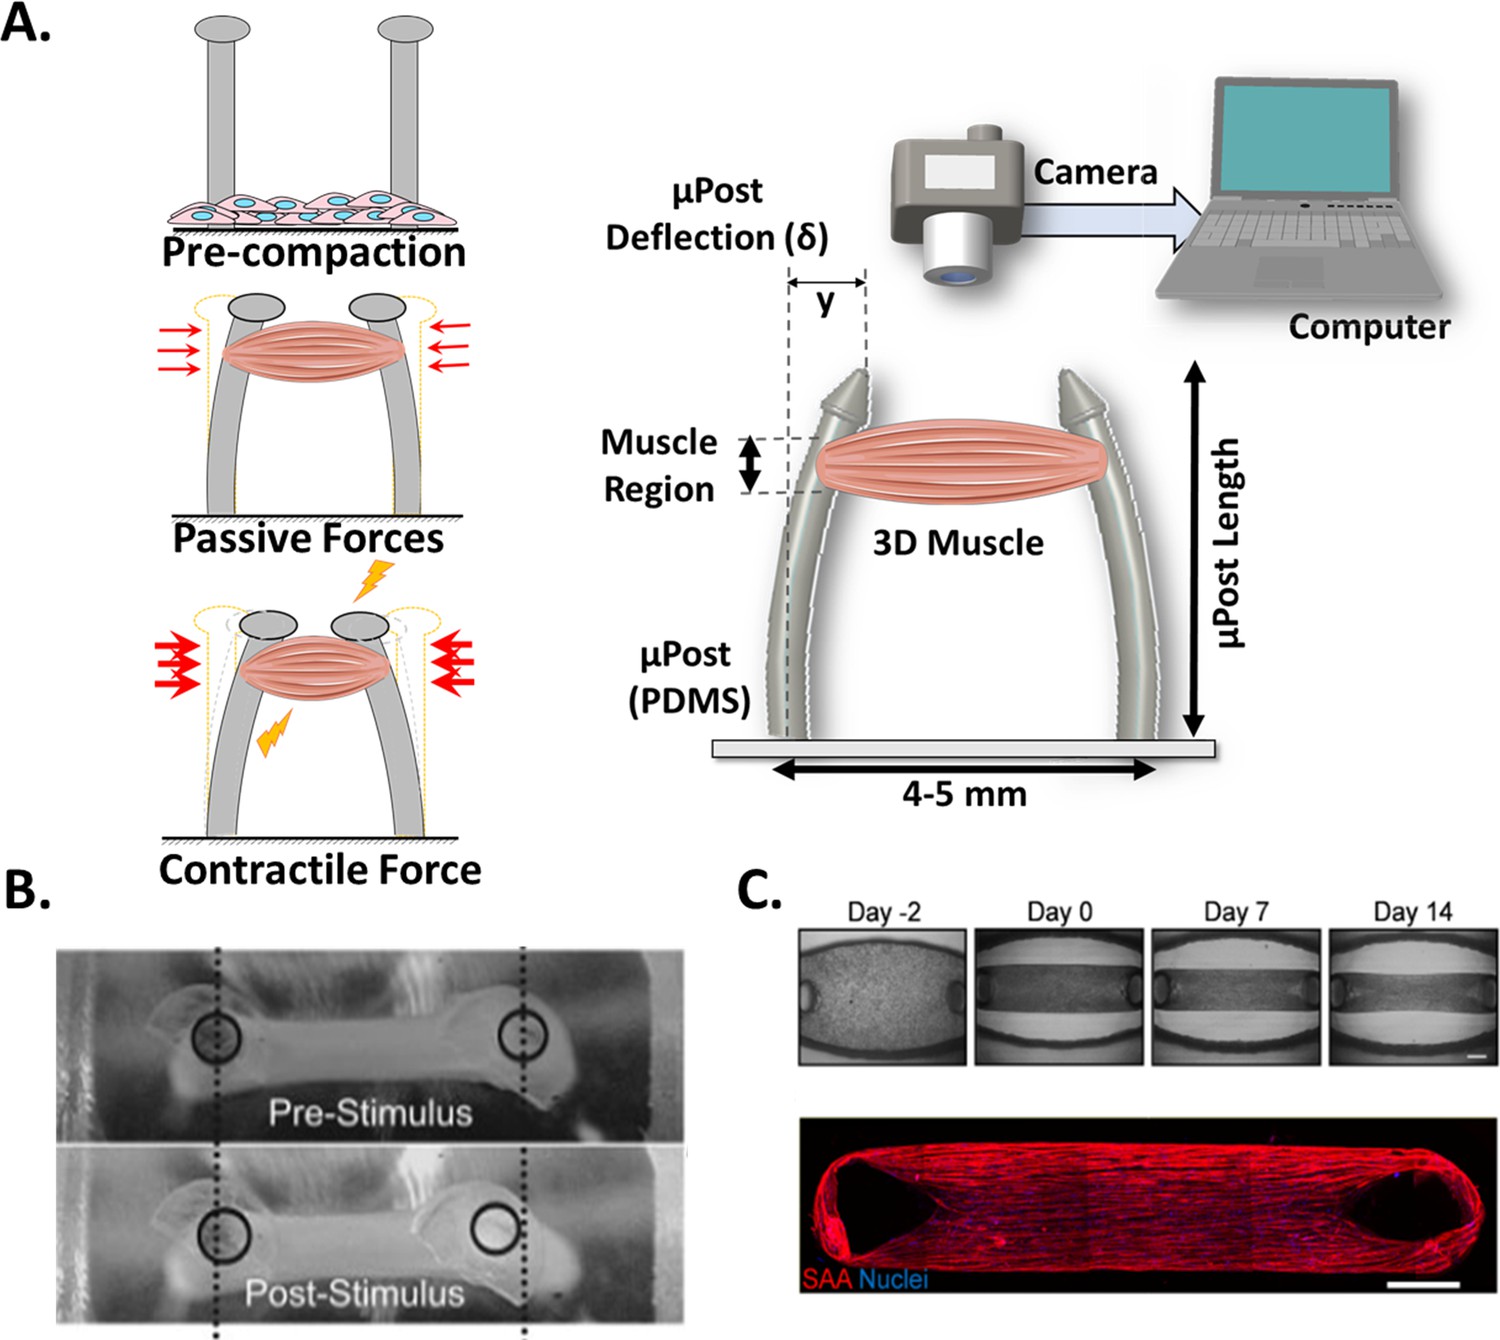 Contractile force assessment methods for in vitro skeletal muscle